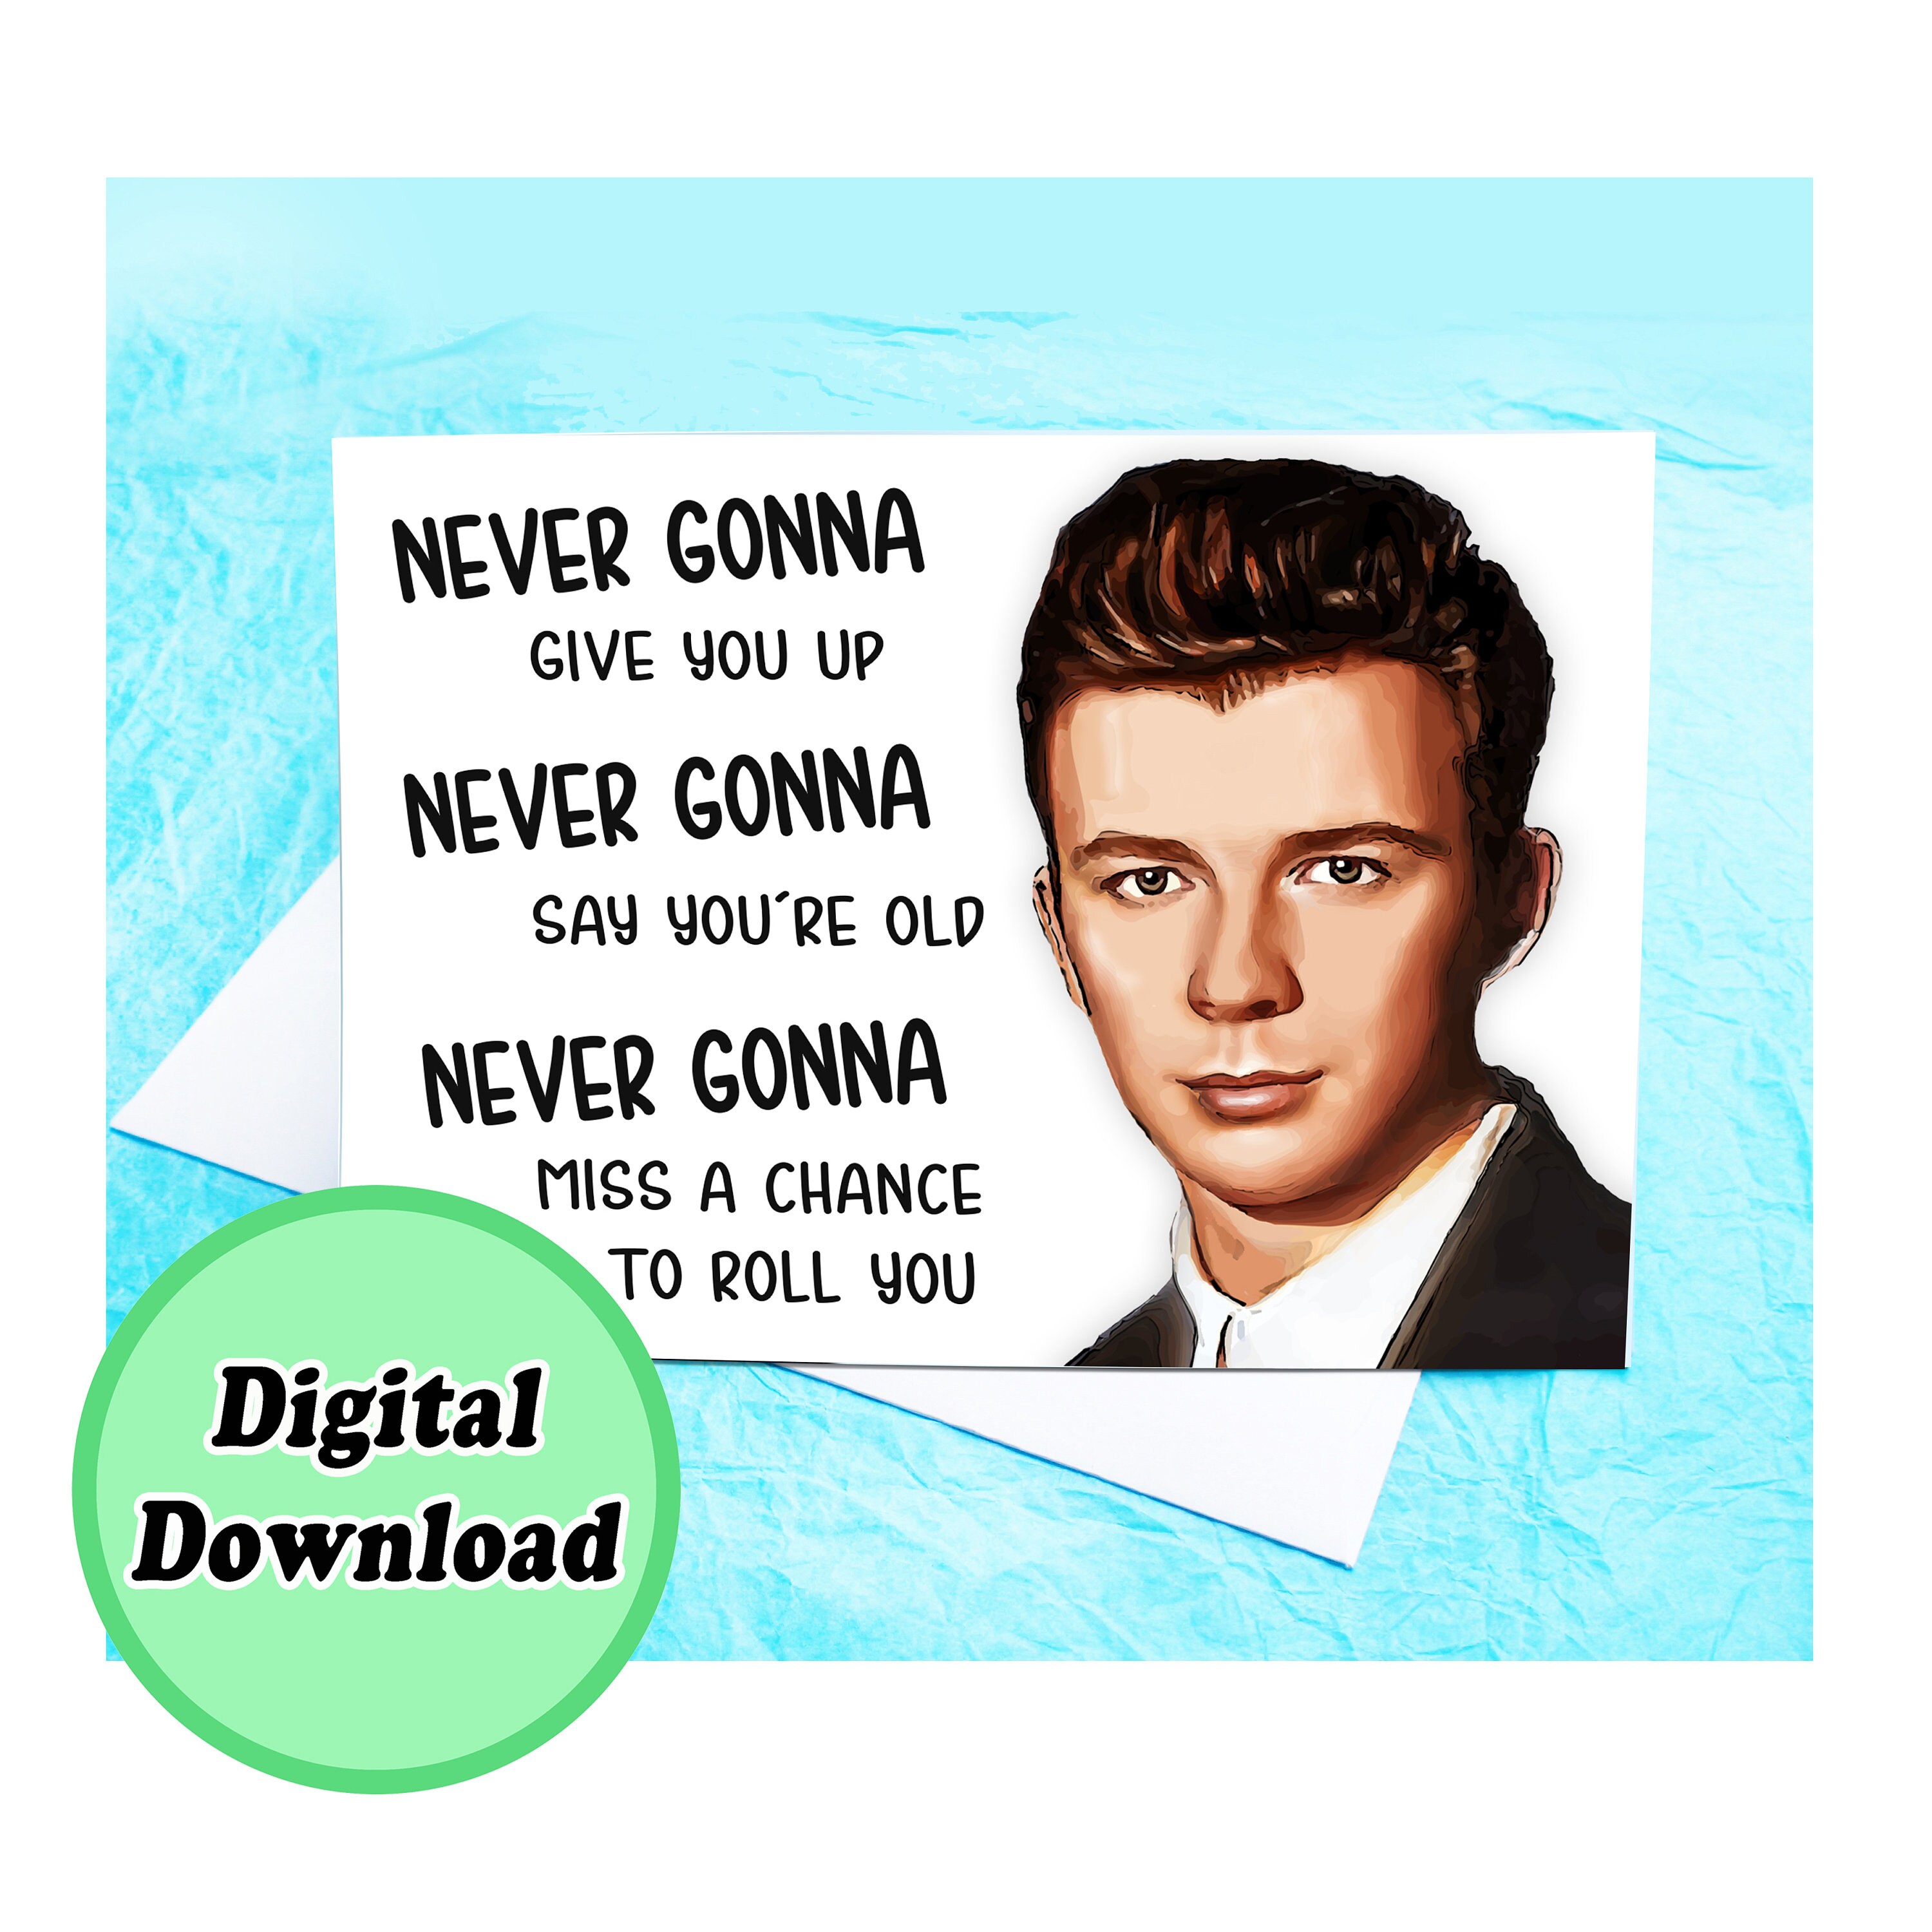  (5 Pack) Rick Roll QR Code Sticker - Never Going to Give You  Up - Never Gonna Give You Up - 3.5 x 3.5 inch - Funny Prank Joke Gag